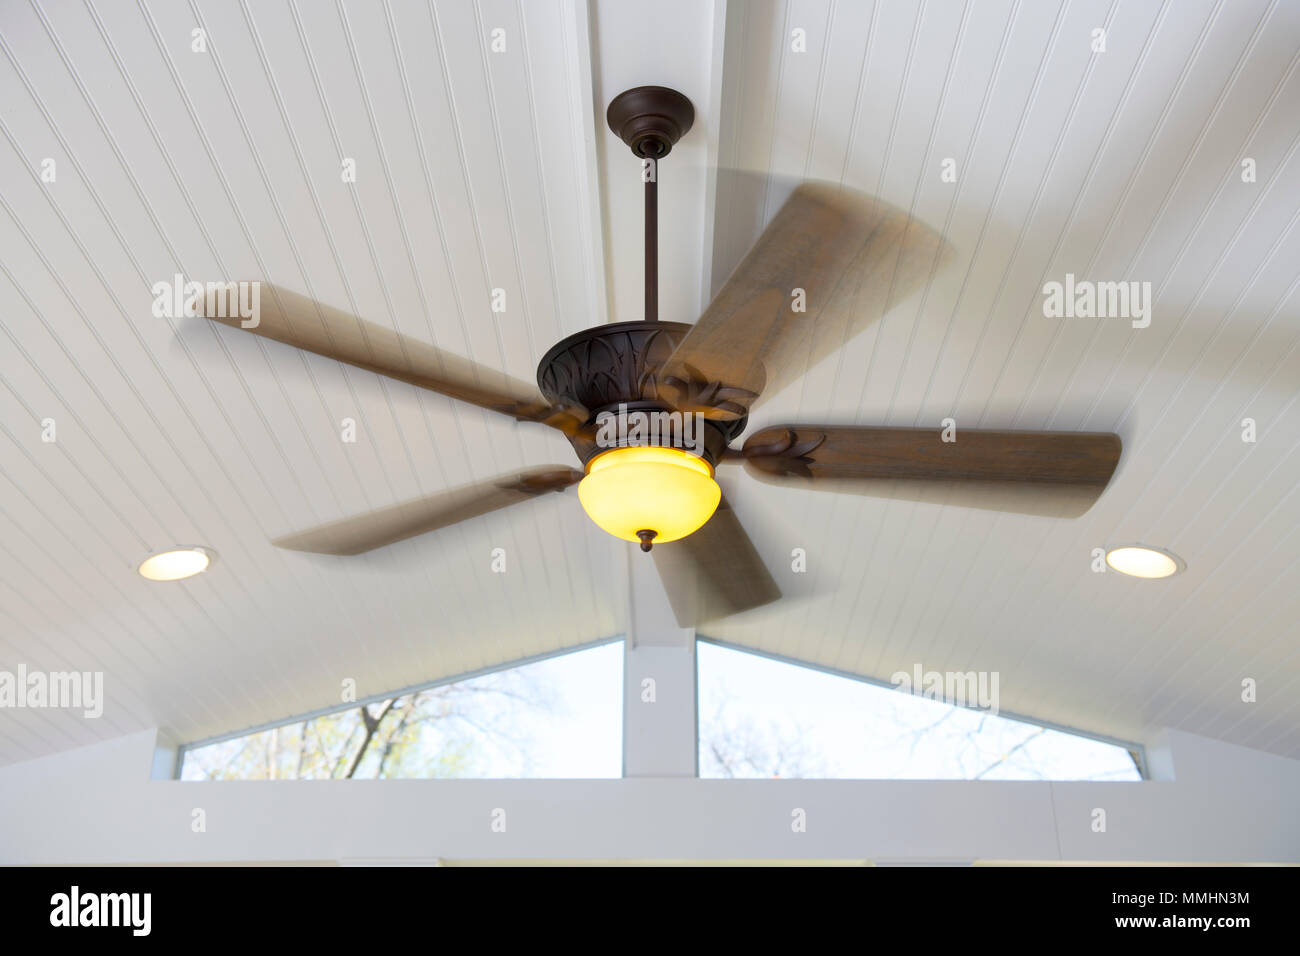 Home ceiling fan with light electric cooling wind movement Stock Photo